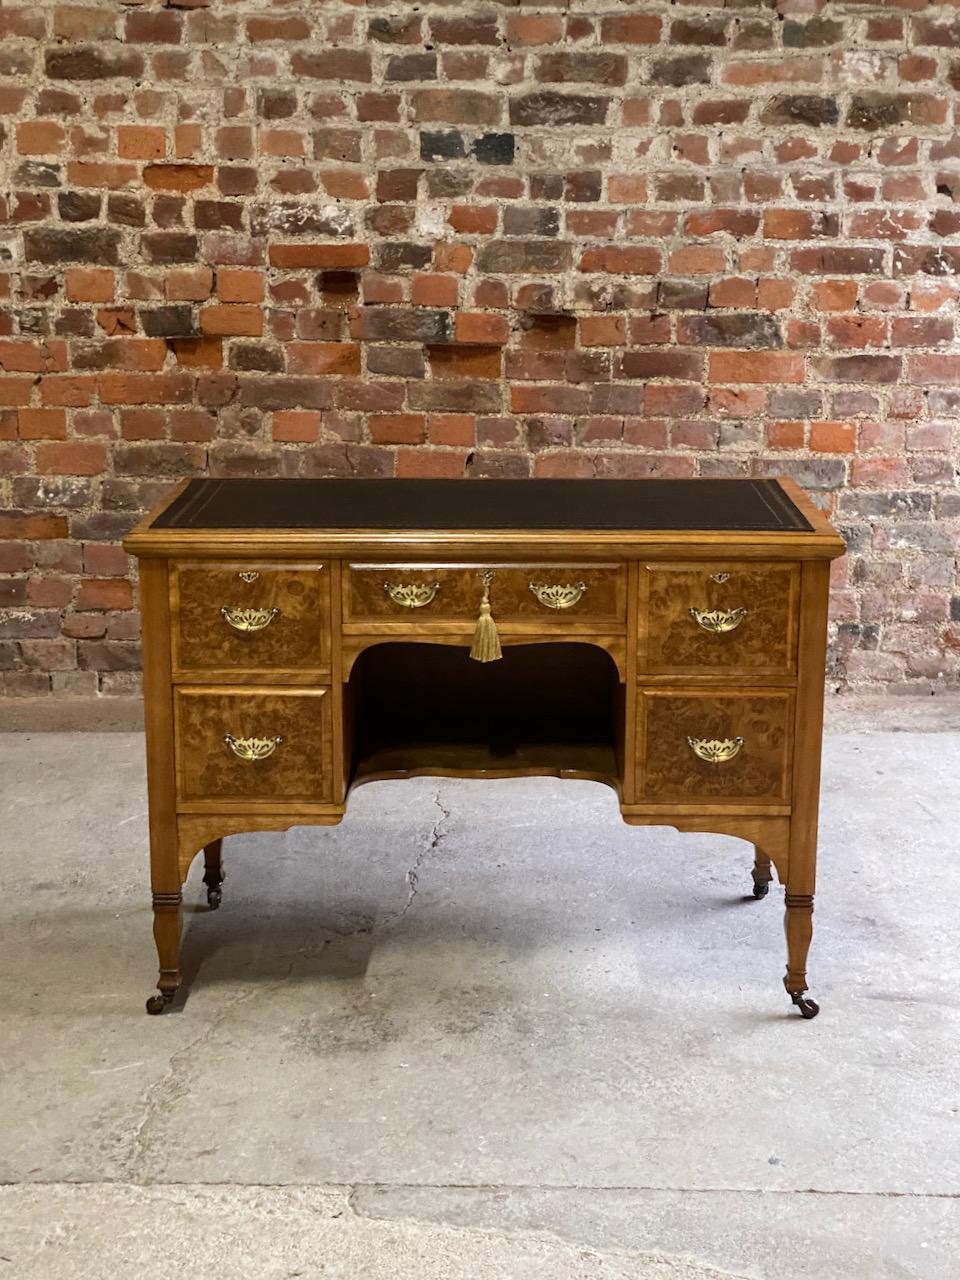 Magnificent late 19th century Arts & Crafts burr walnut kneehole desk by Shapland & Petter of Barnstaple circa 1890, the rectangular burr walnut top with inset black and gilt tooled skived leather writing surface, above a central frieze drawer over